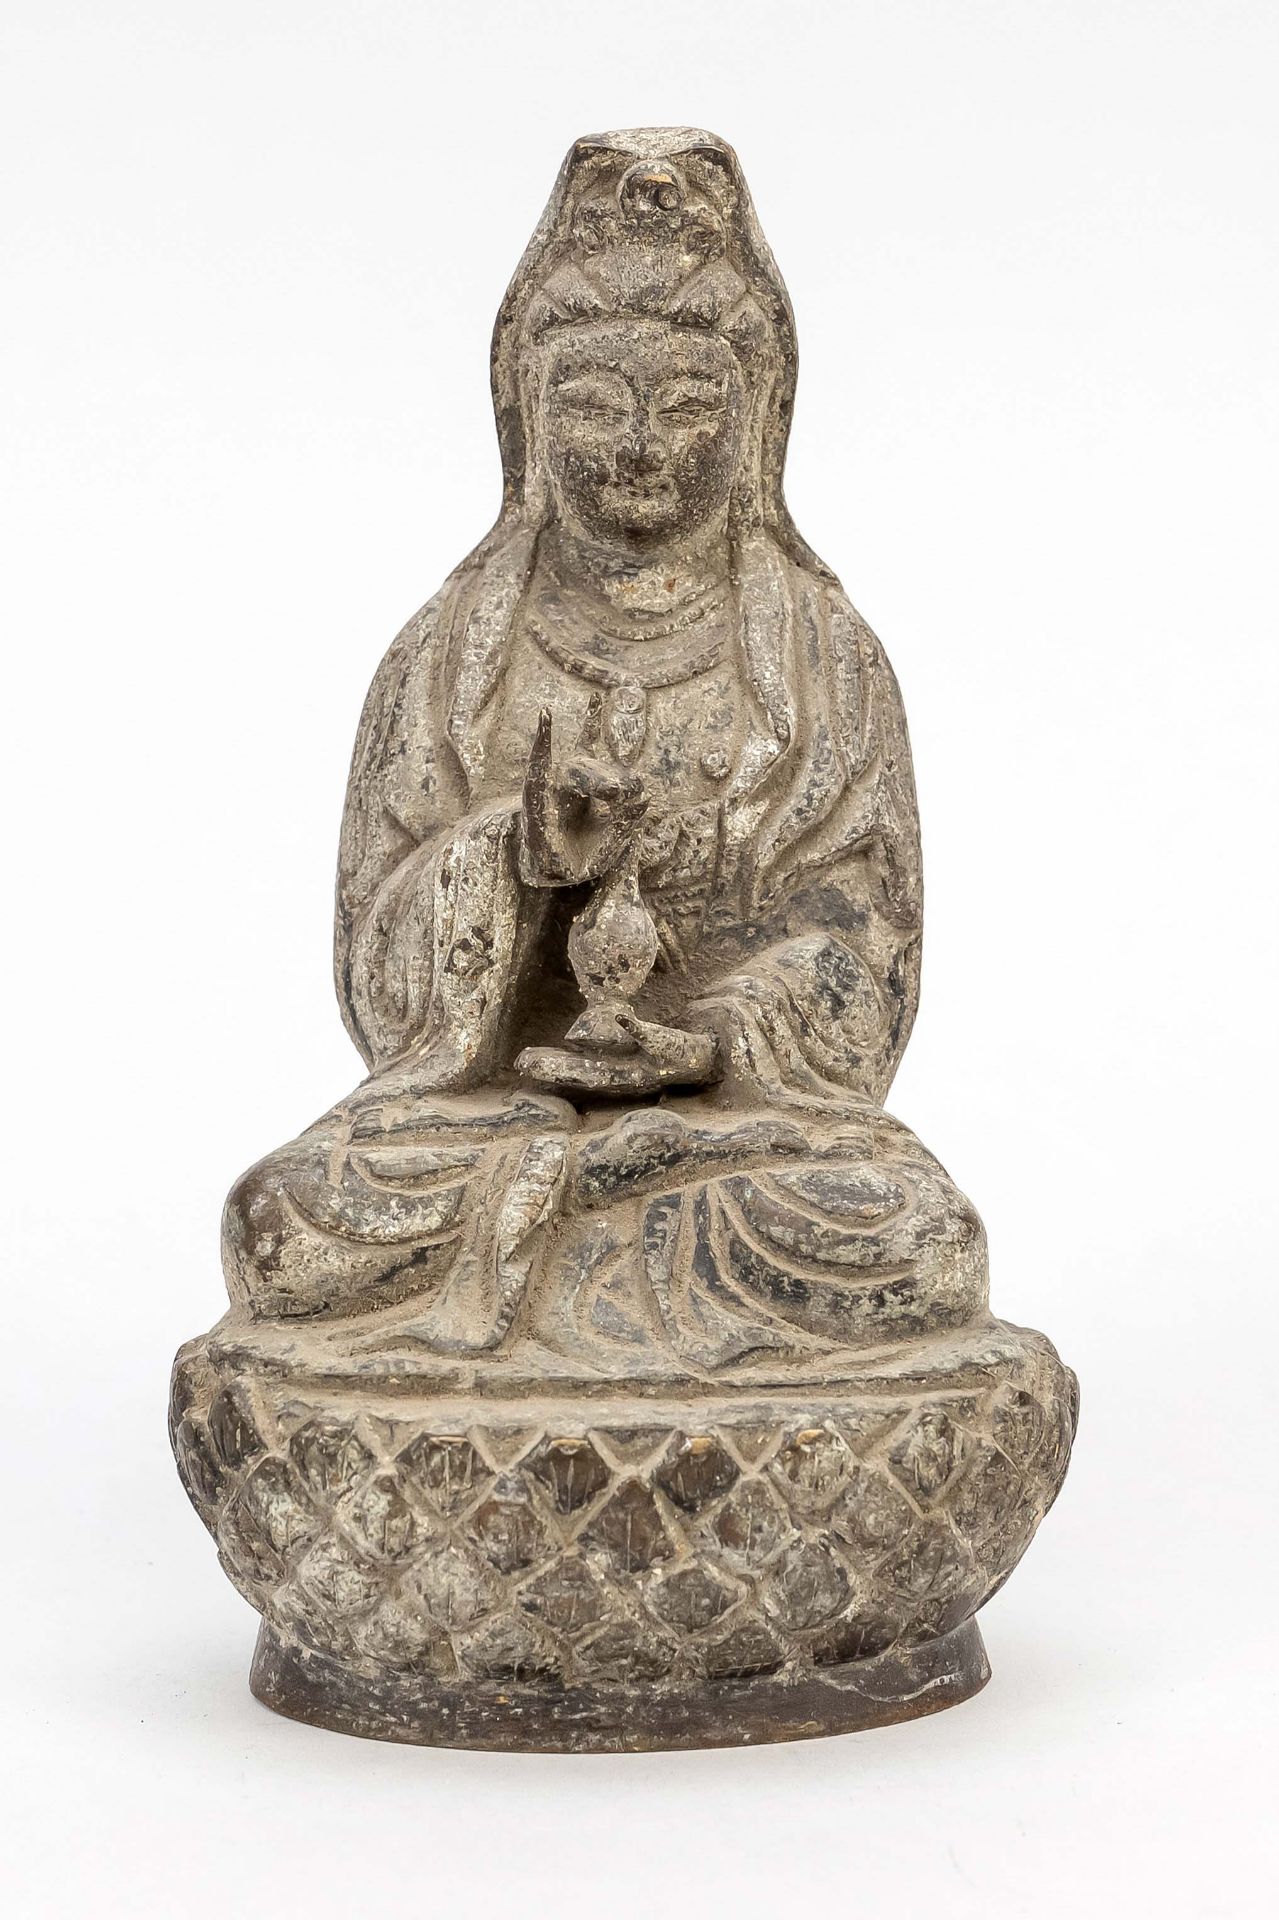 Bronze sculpture sitting Guanyin, China, probably Qing dynasty(1644-1911), patinated bronze